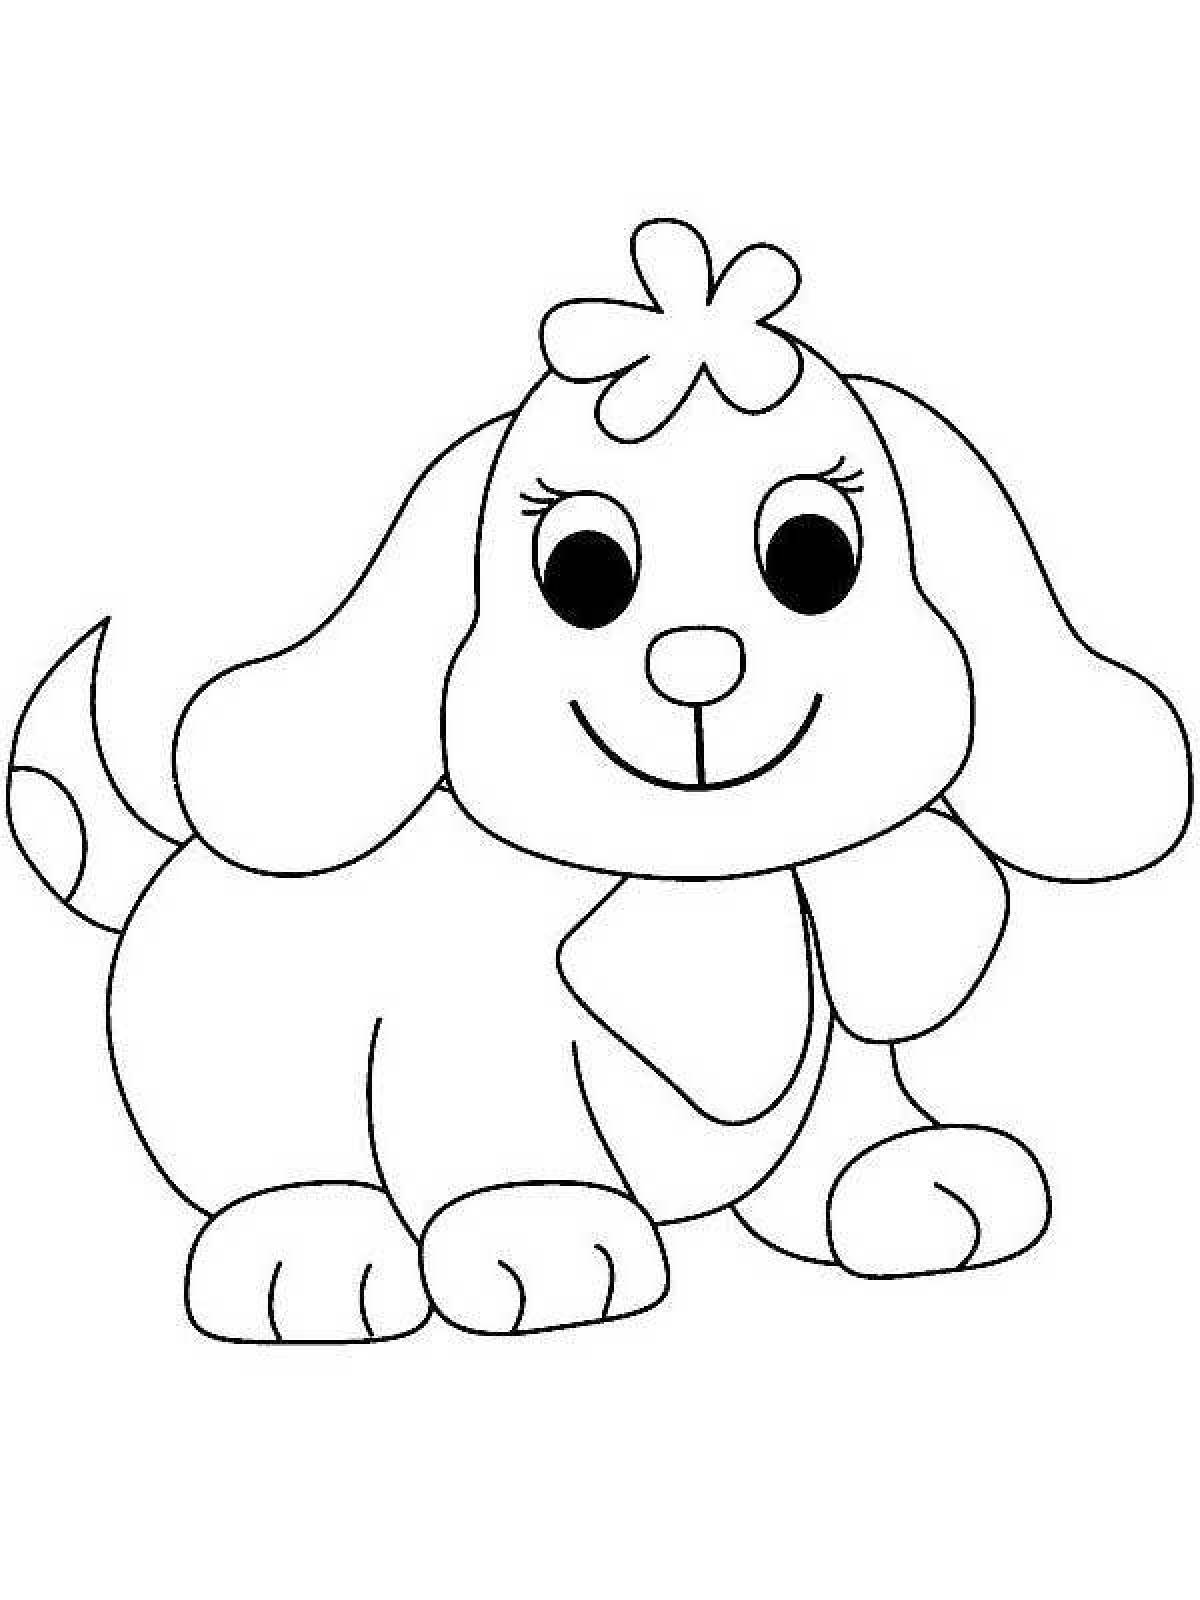 Live dog coloring for children 3-4 years old